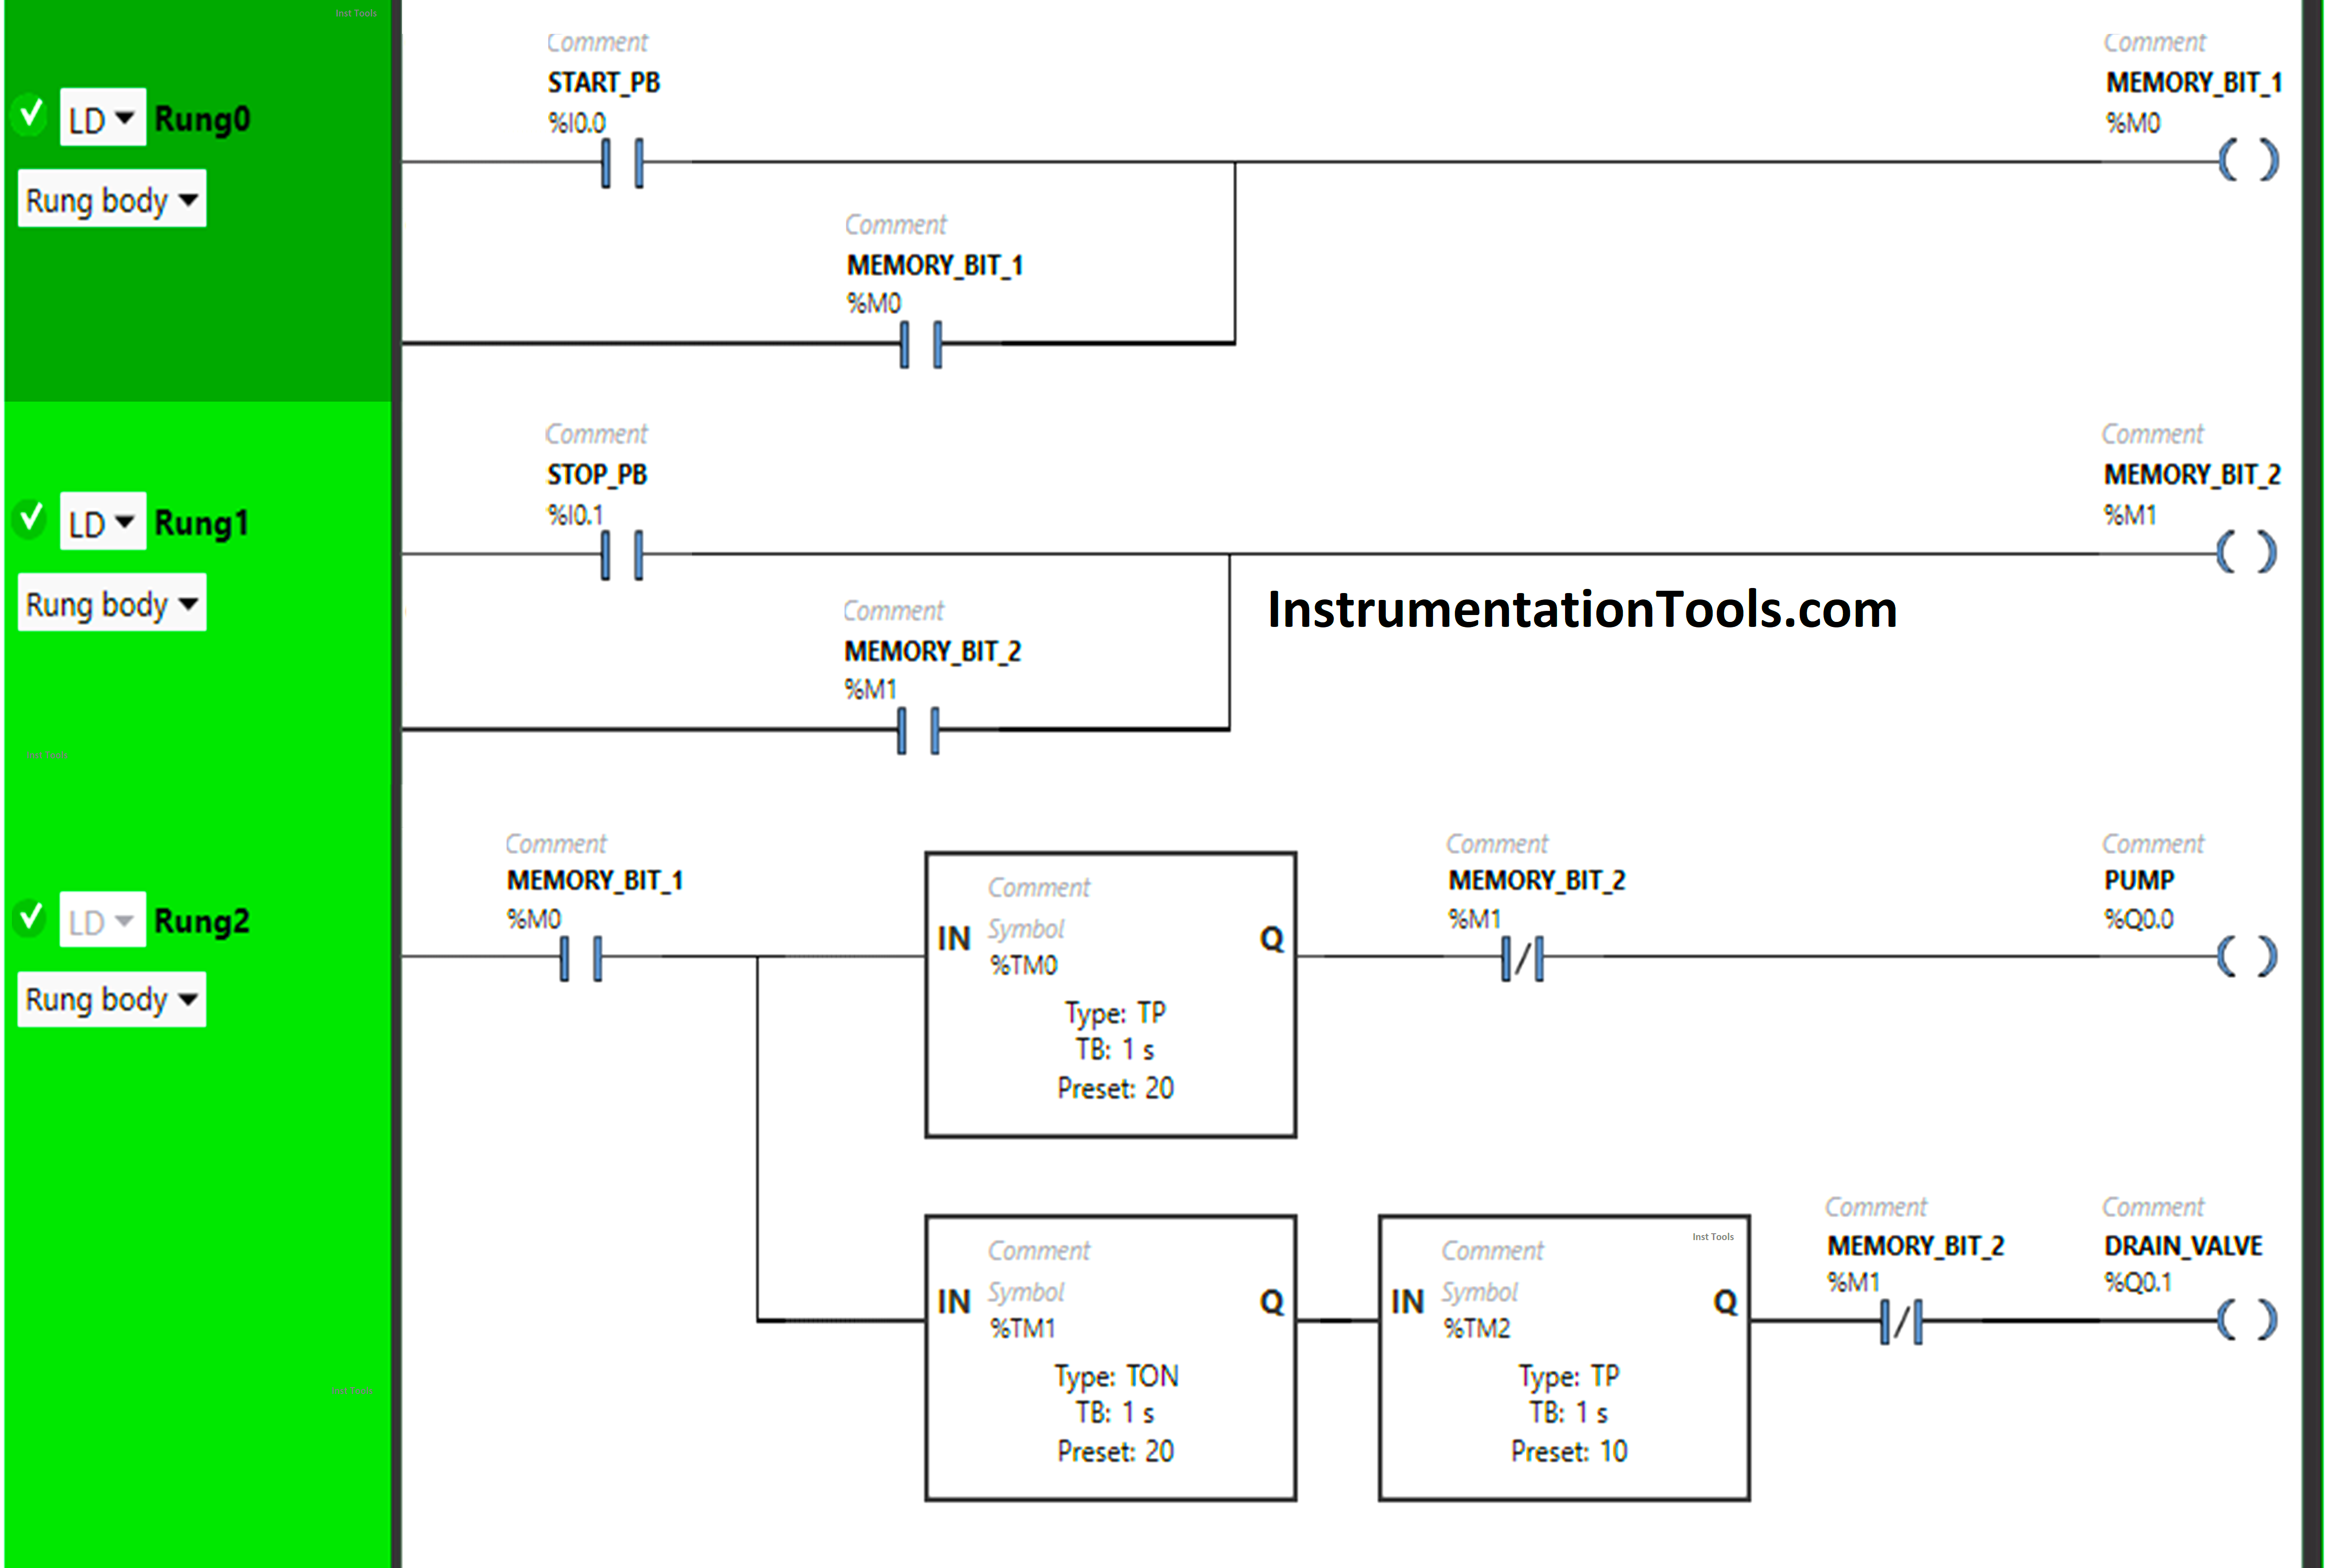 PLC Programming for Pumping and Draining System